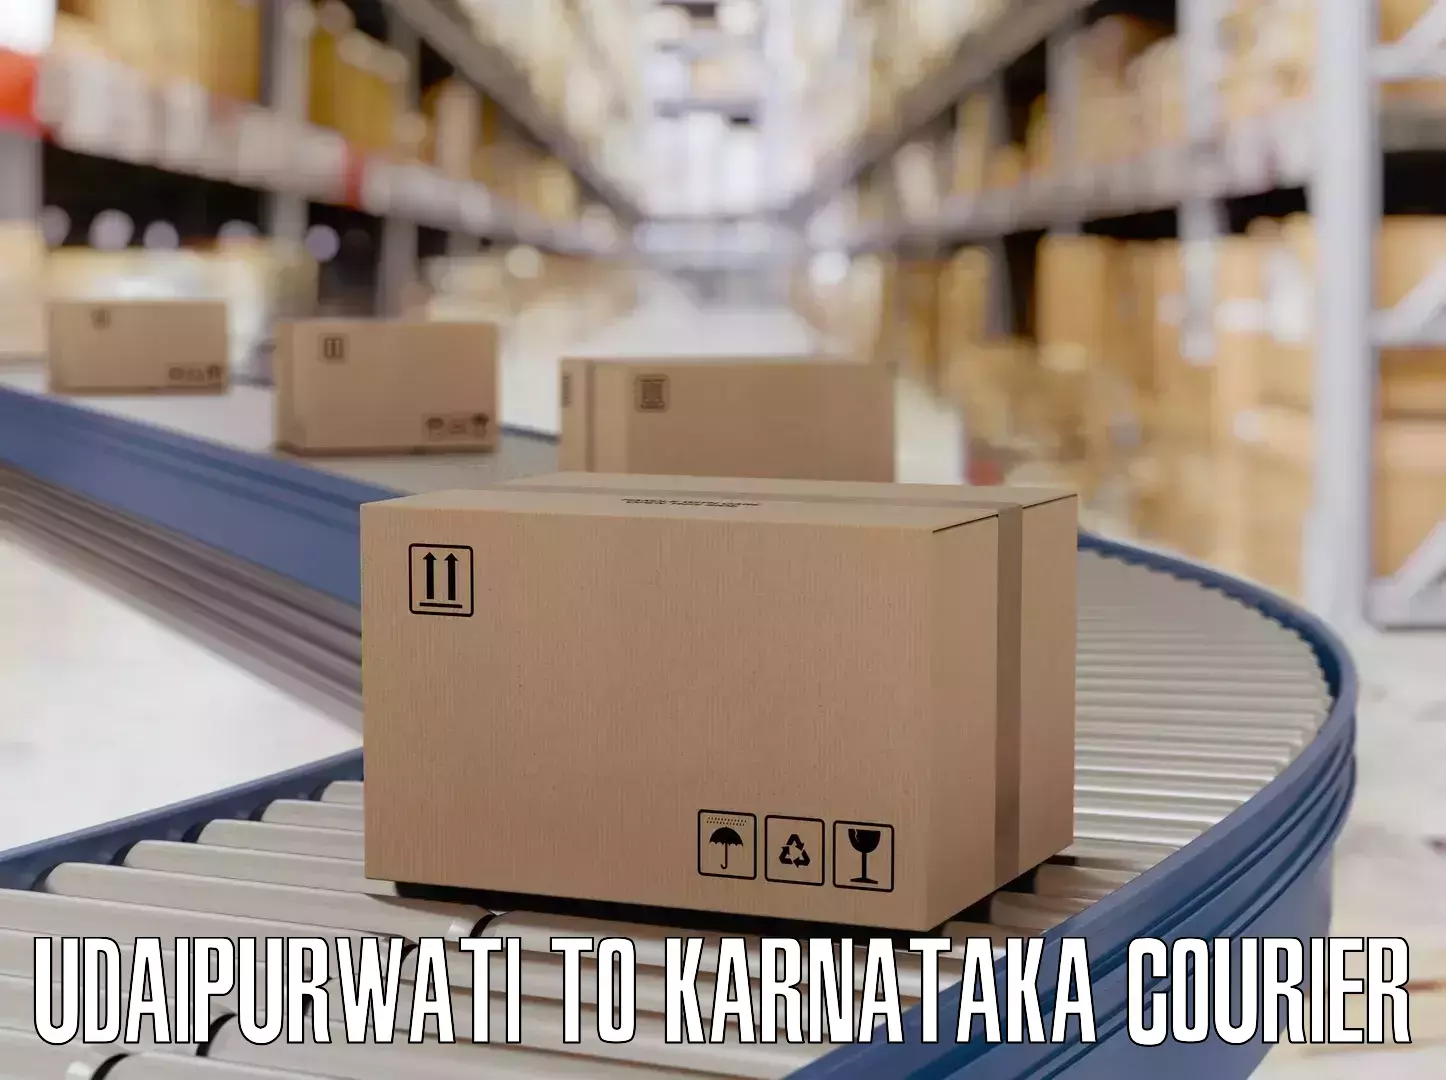 Personal effects shipping in Udaipurwati to Chikkaballapur